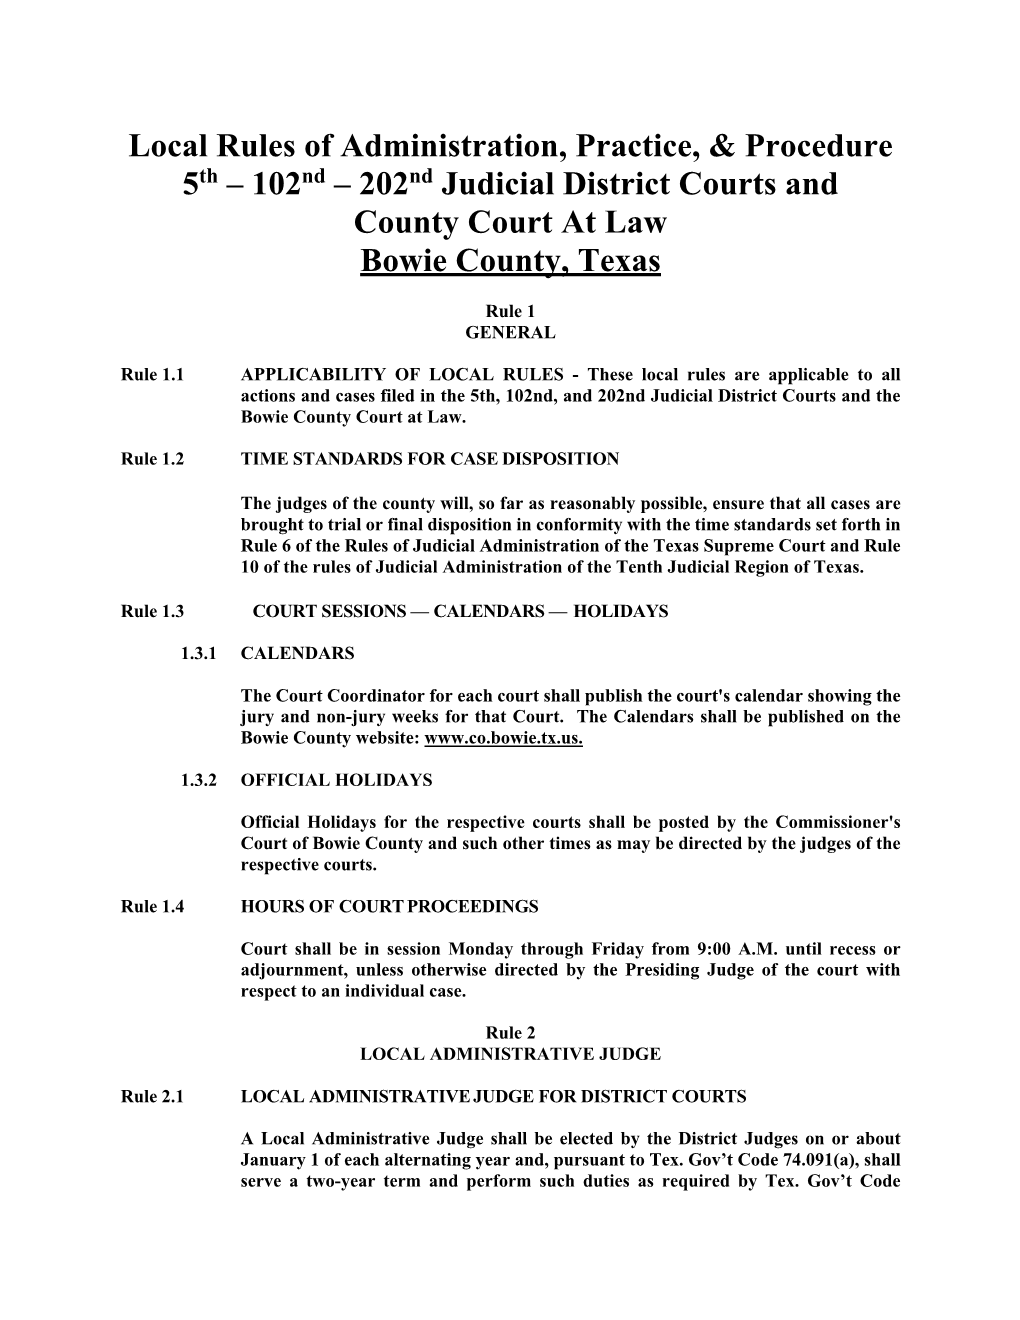 Local Rules of Administration, Practice, & Procedure 5Th – 102Nd – 202Nd Judicial District Courts and County Court at Law Bowie County, Texas